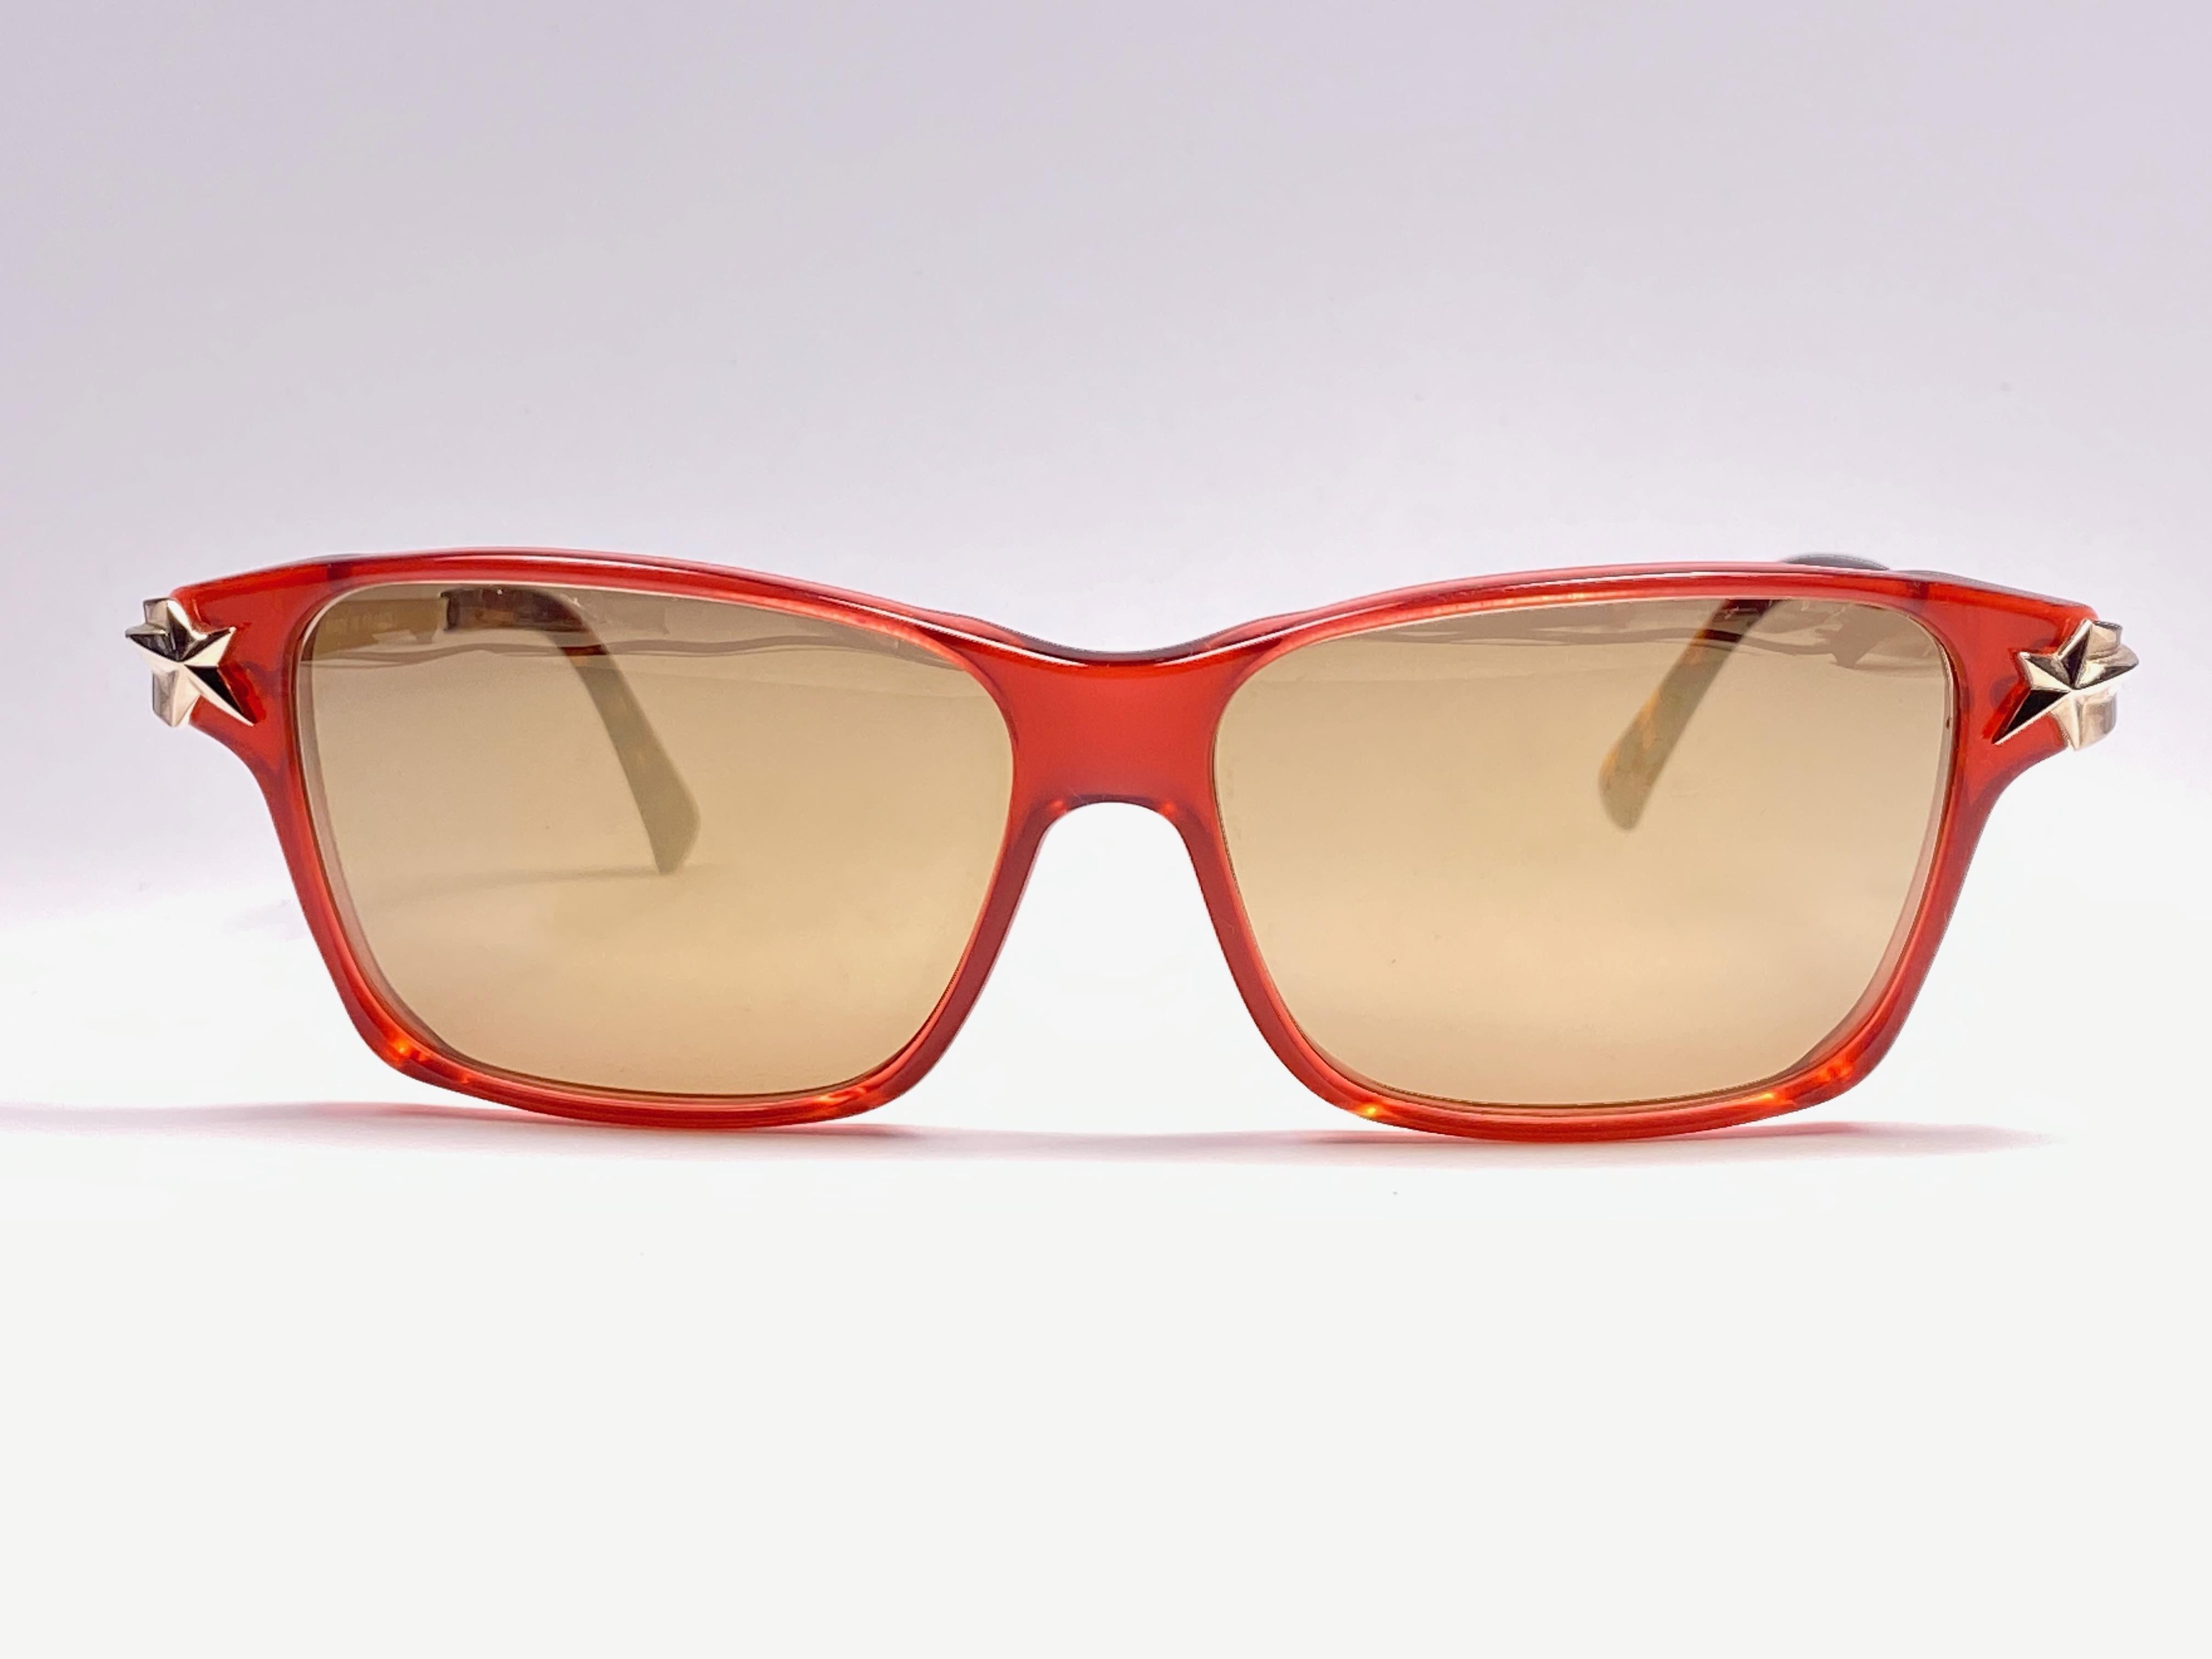 Super cool vintage THIERRY MUGLER 1980’s sunglasses. Red translucent frame with gold mirrored lenses.

This pair is an style statement. The piece could show minor sign of wear due to storage.

A great opportunity to achieve a unique and yet timeless